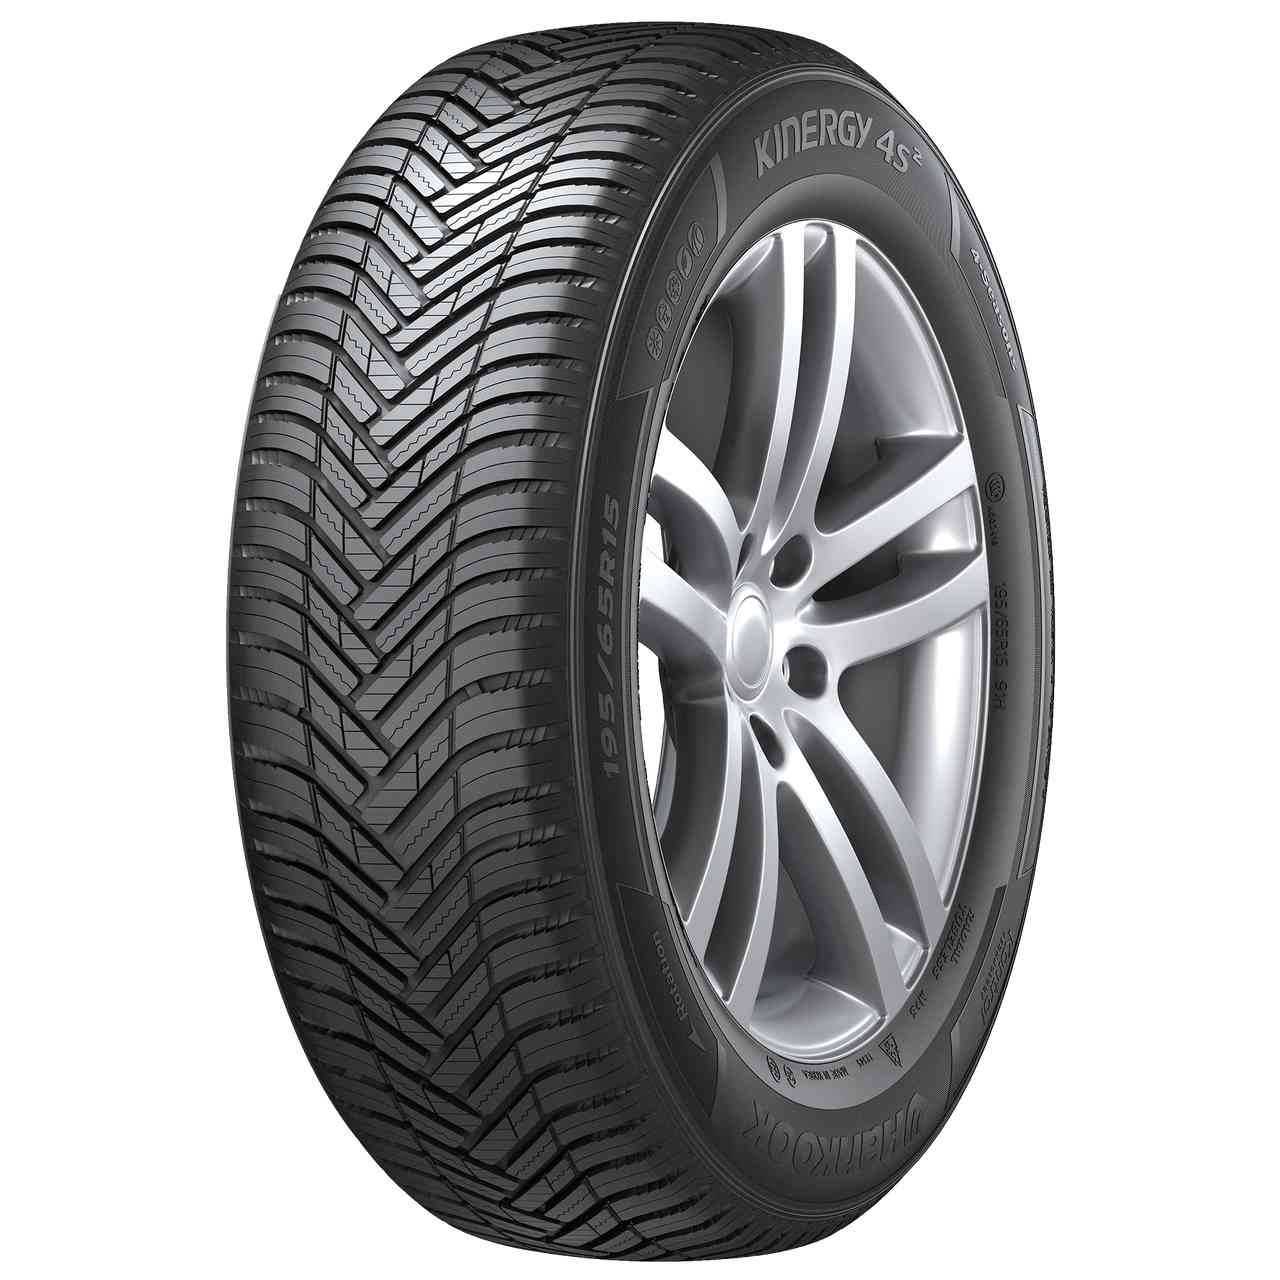 HANKOOK KINERGY 4S 2 (H750) 205/45R17 88V BSW